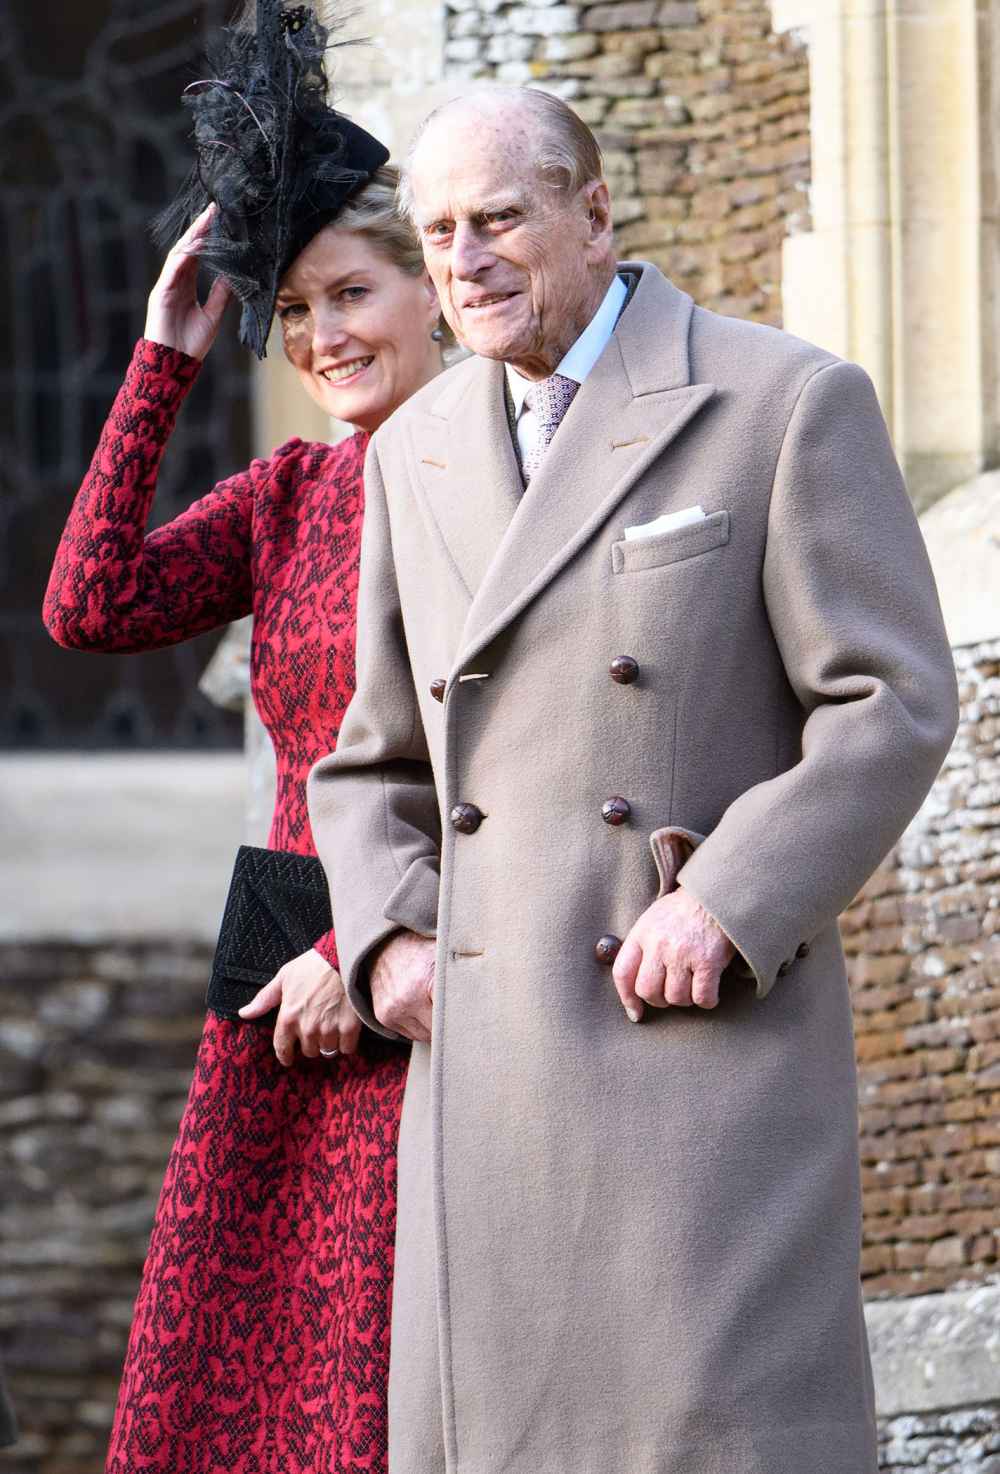 Prince Philip's Death 'Left a Giant-Sized Hole' in Royal Family, Sophie, Countess of Wessex Says